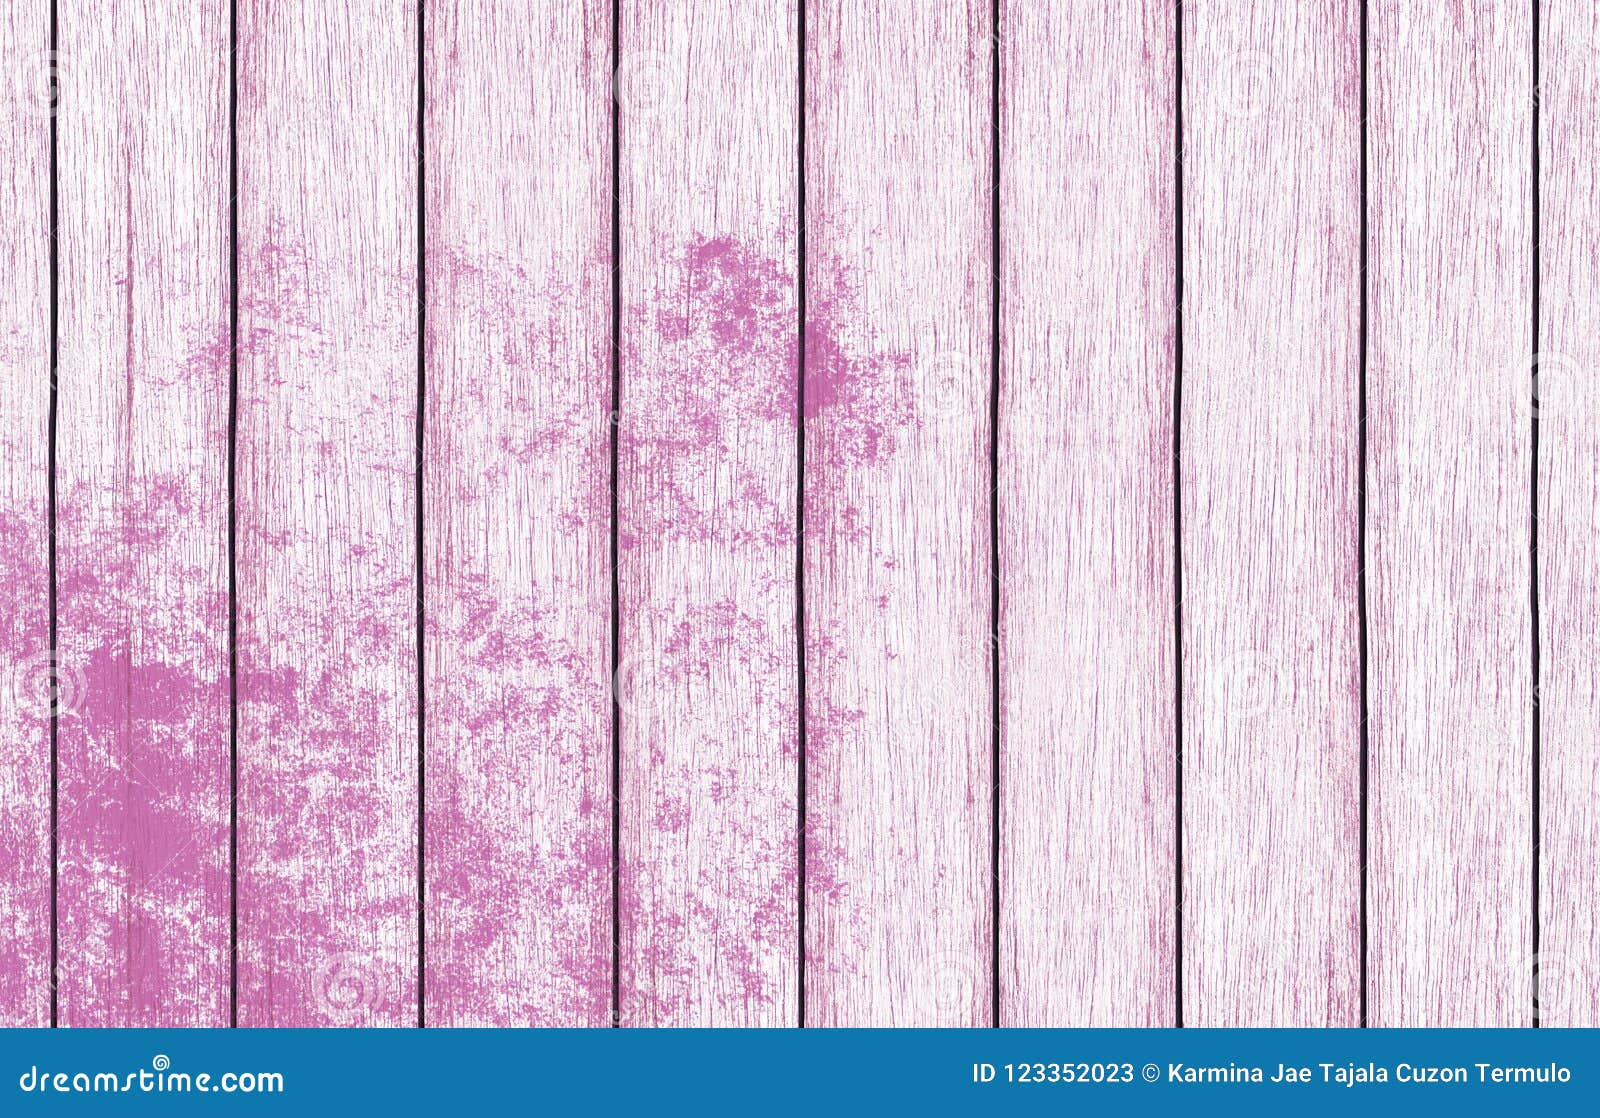 Painted Wood Background Wallpaper With Pink Paint Stock